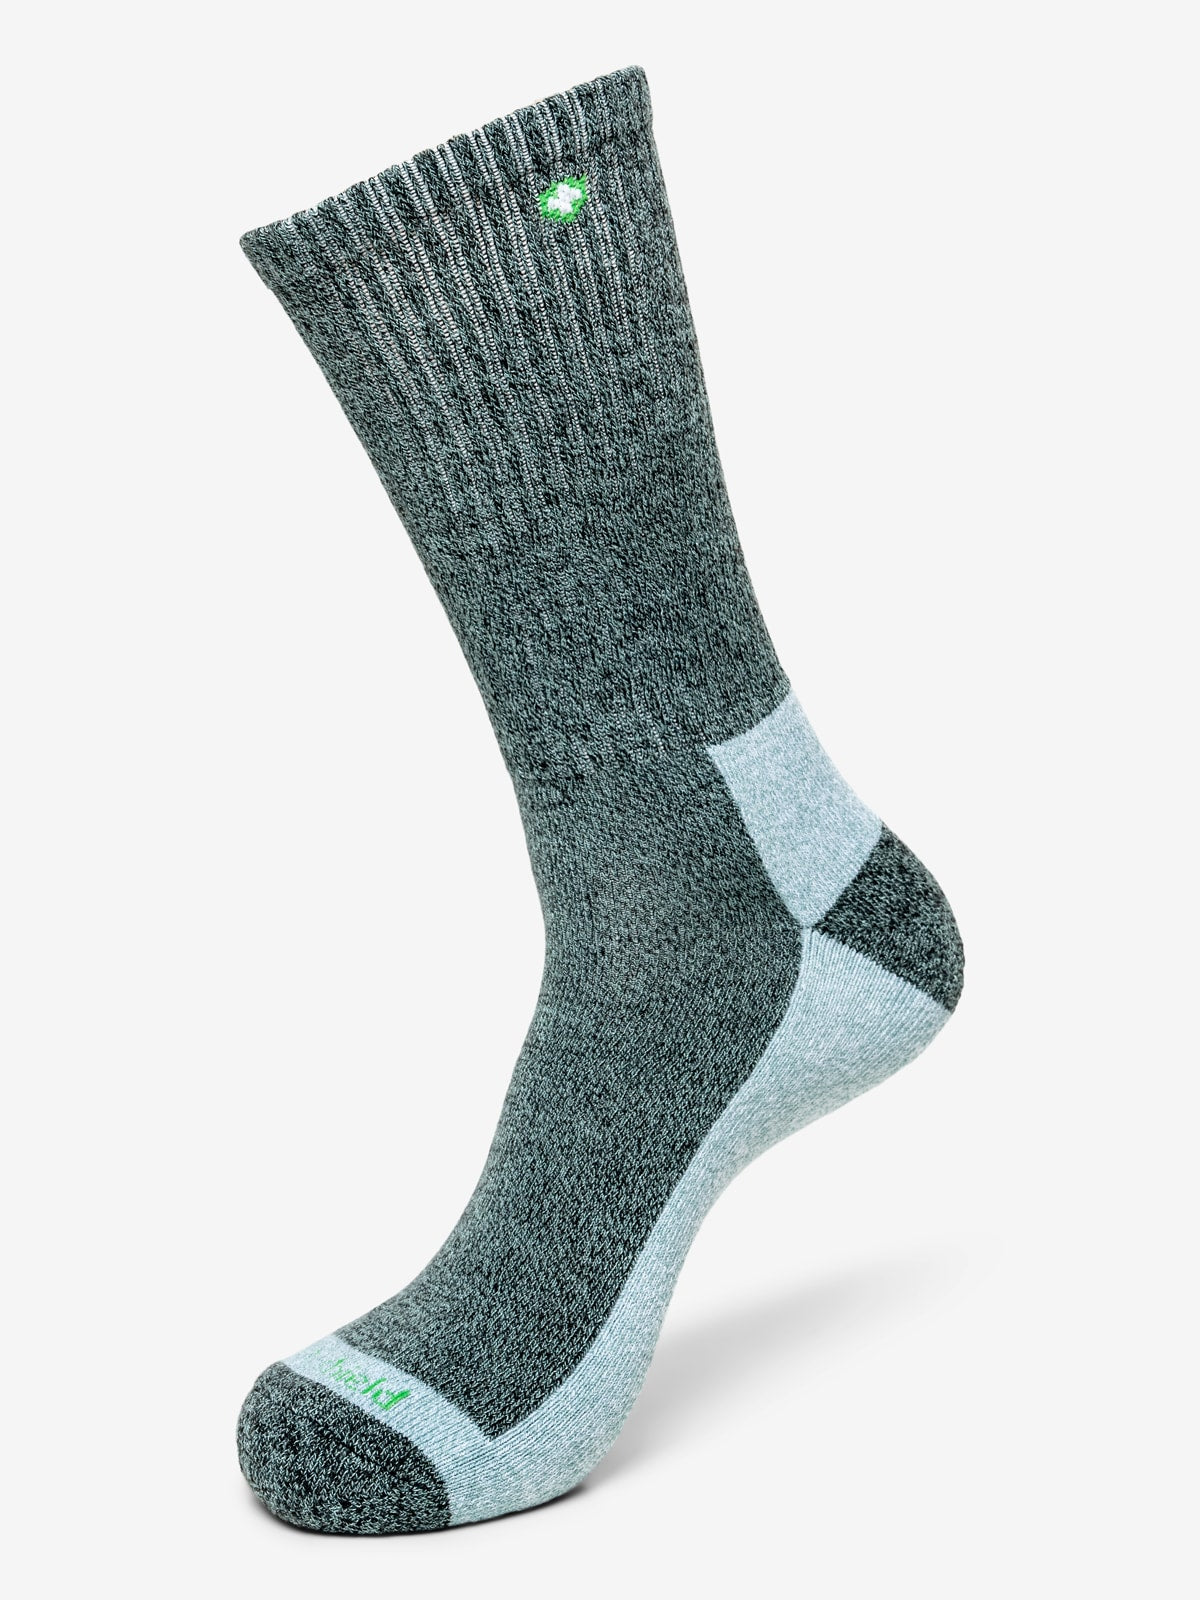 Tick Repellent Hiking Socks  Repel Insect and Prevent Bug Bites